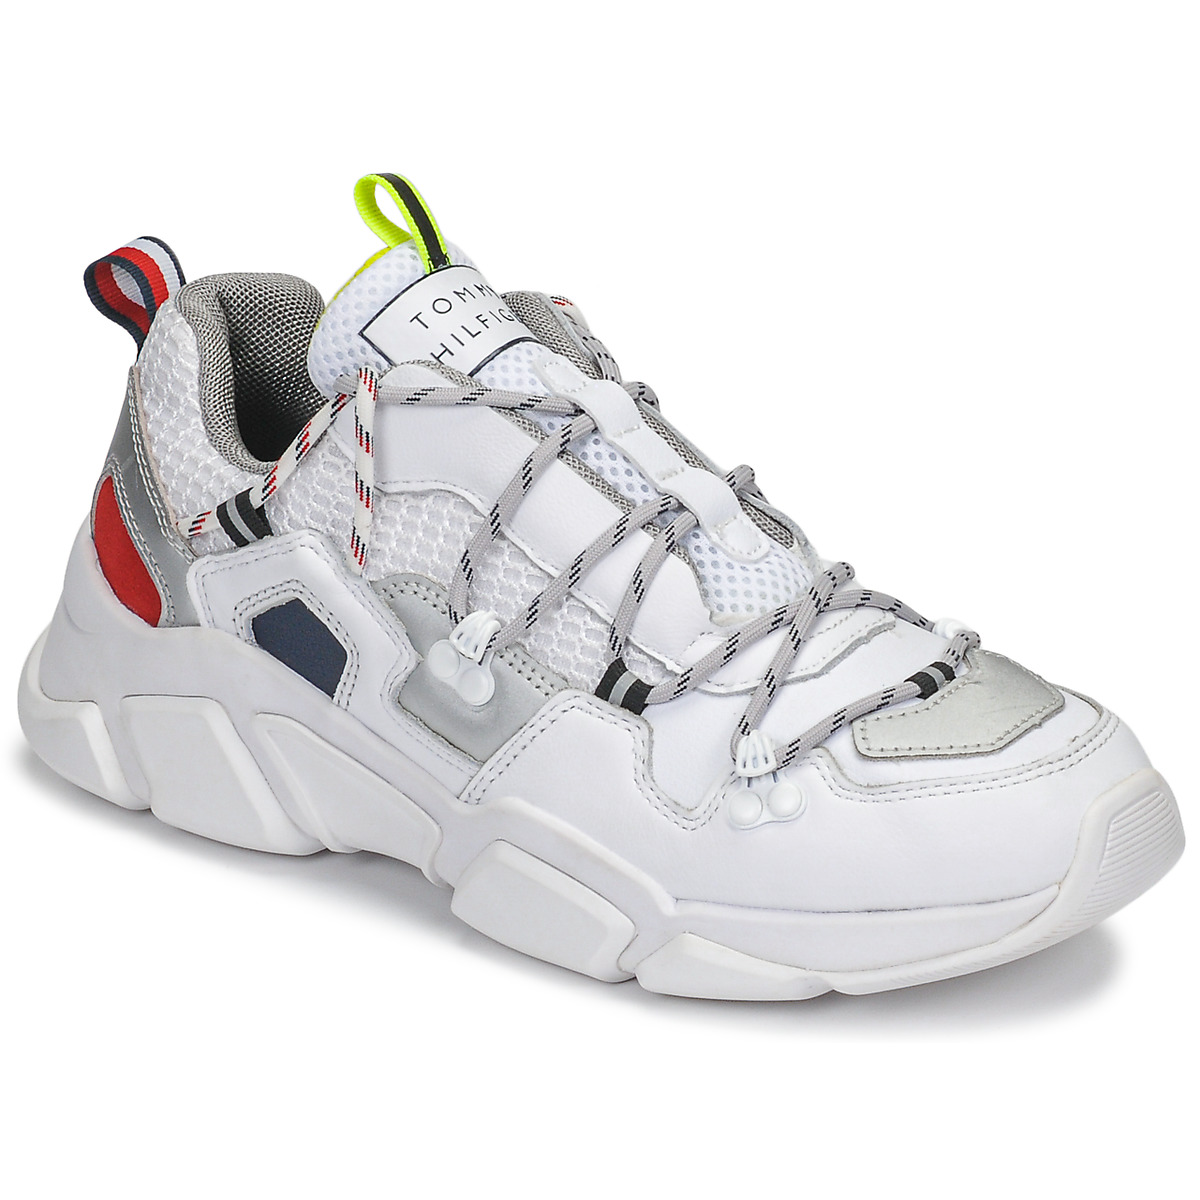 Tommy Hilfiger City Voyager Chunky Sneaker Womens White Fashion Trainers 